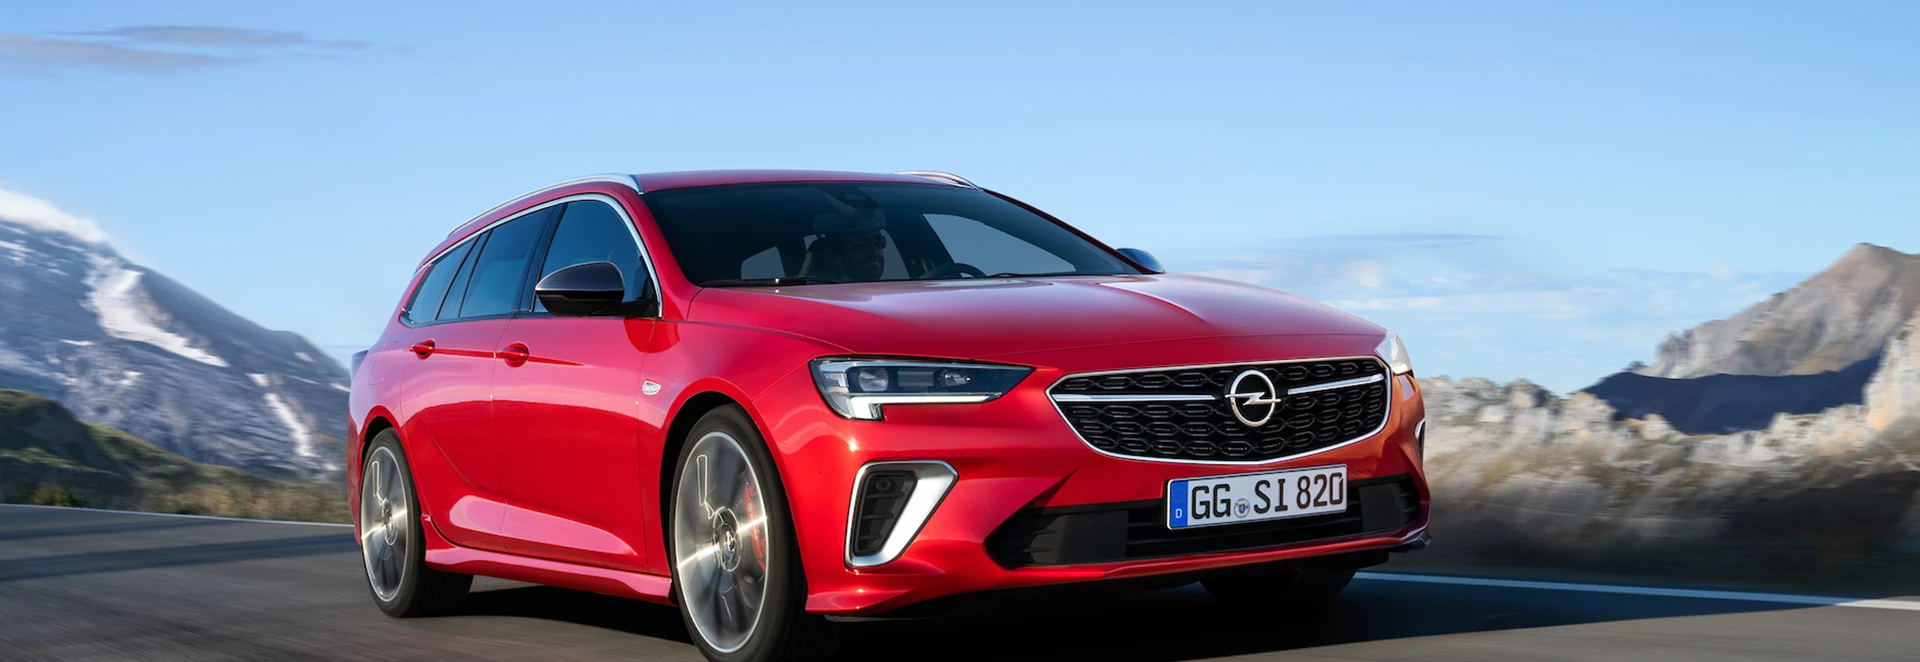 Updated Vauxhall Insignia to feature 227bhp GSI variant